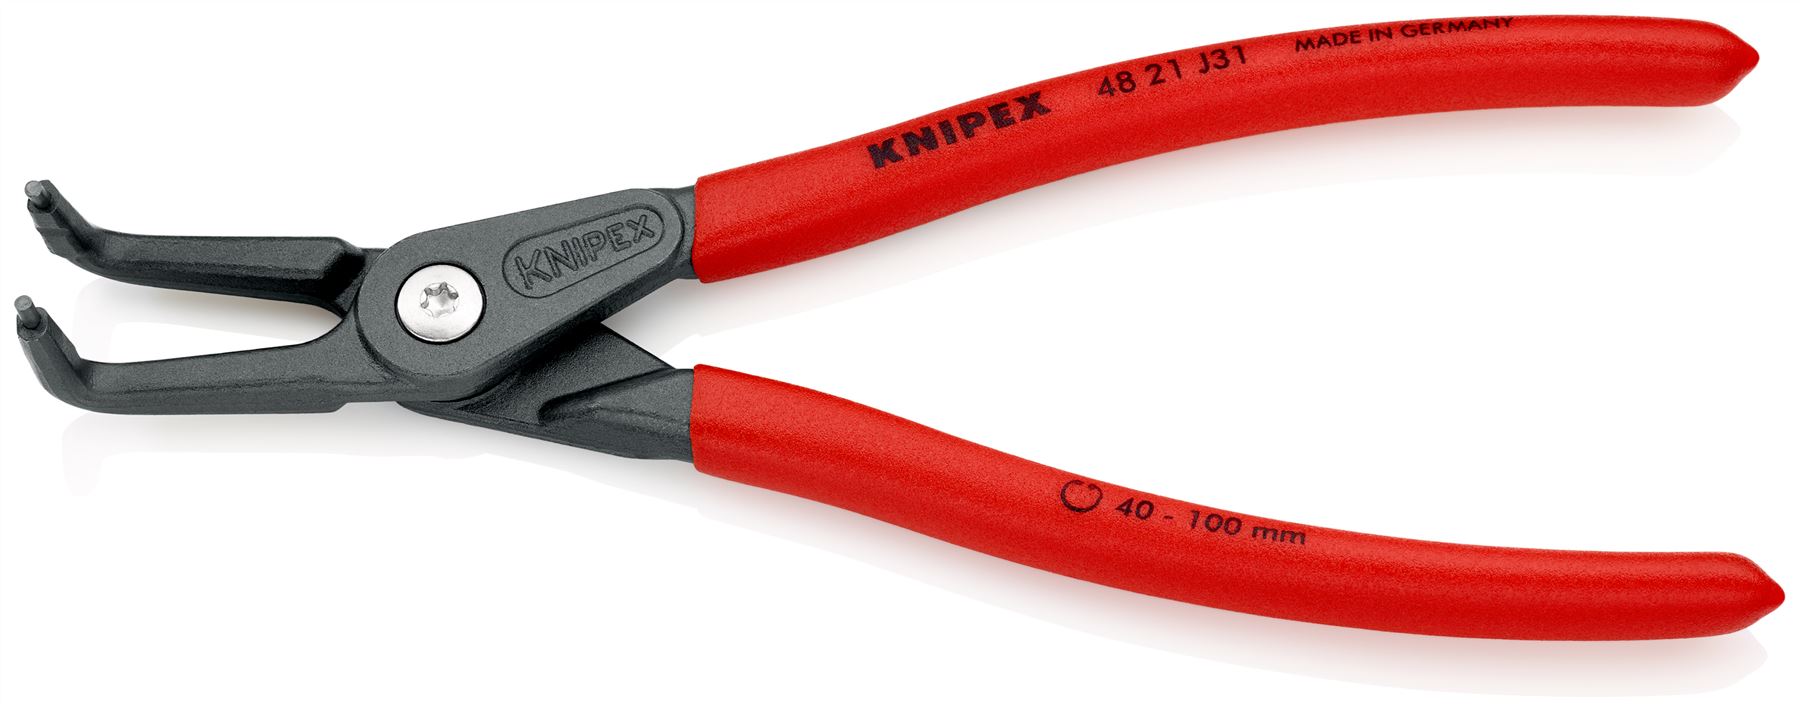 KNIPEX Precision Circlip Pliers for Internal Circlips in Bore Holes 90° Angled 210mm 2.3mm Diameter Tips 40 21 J31